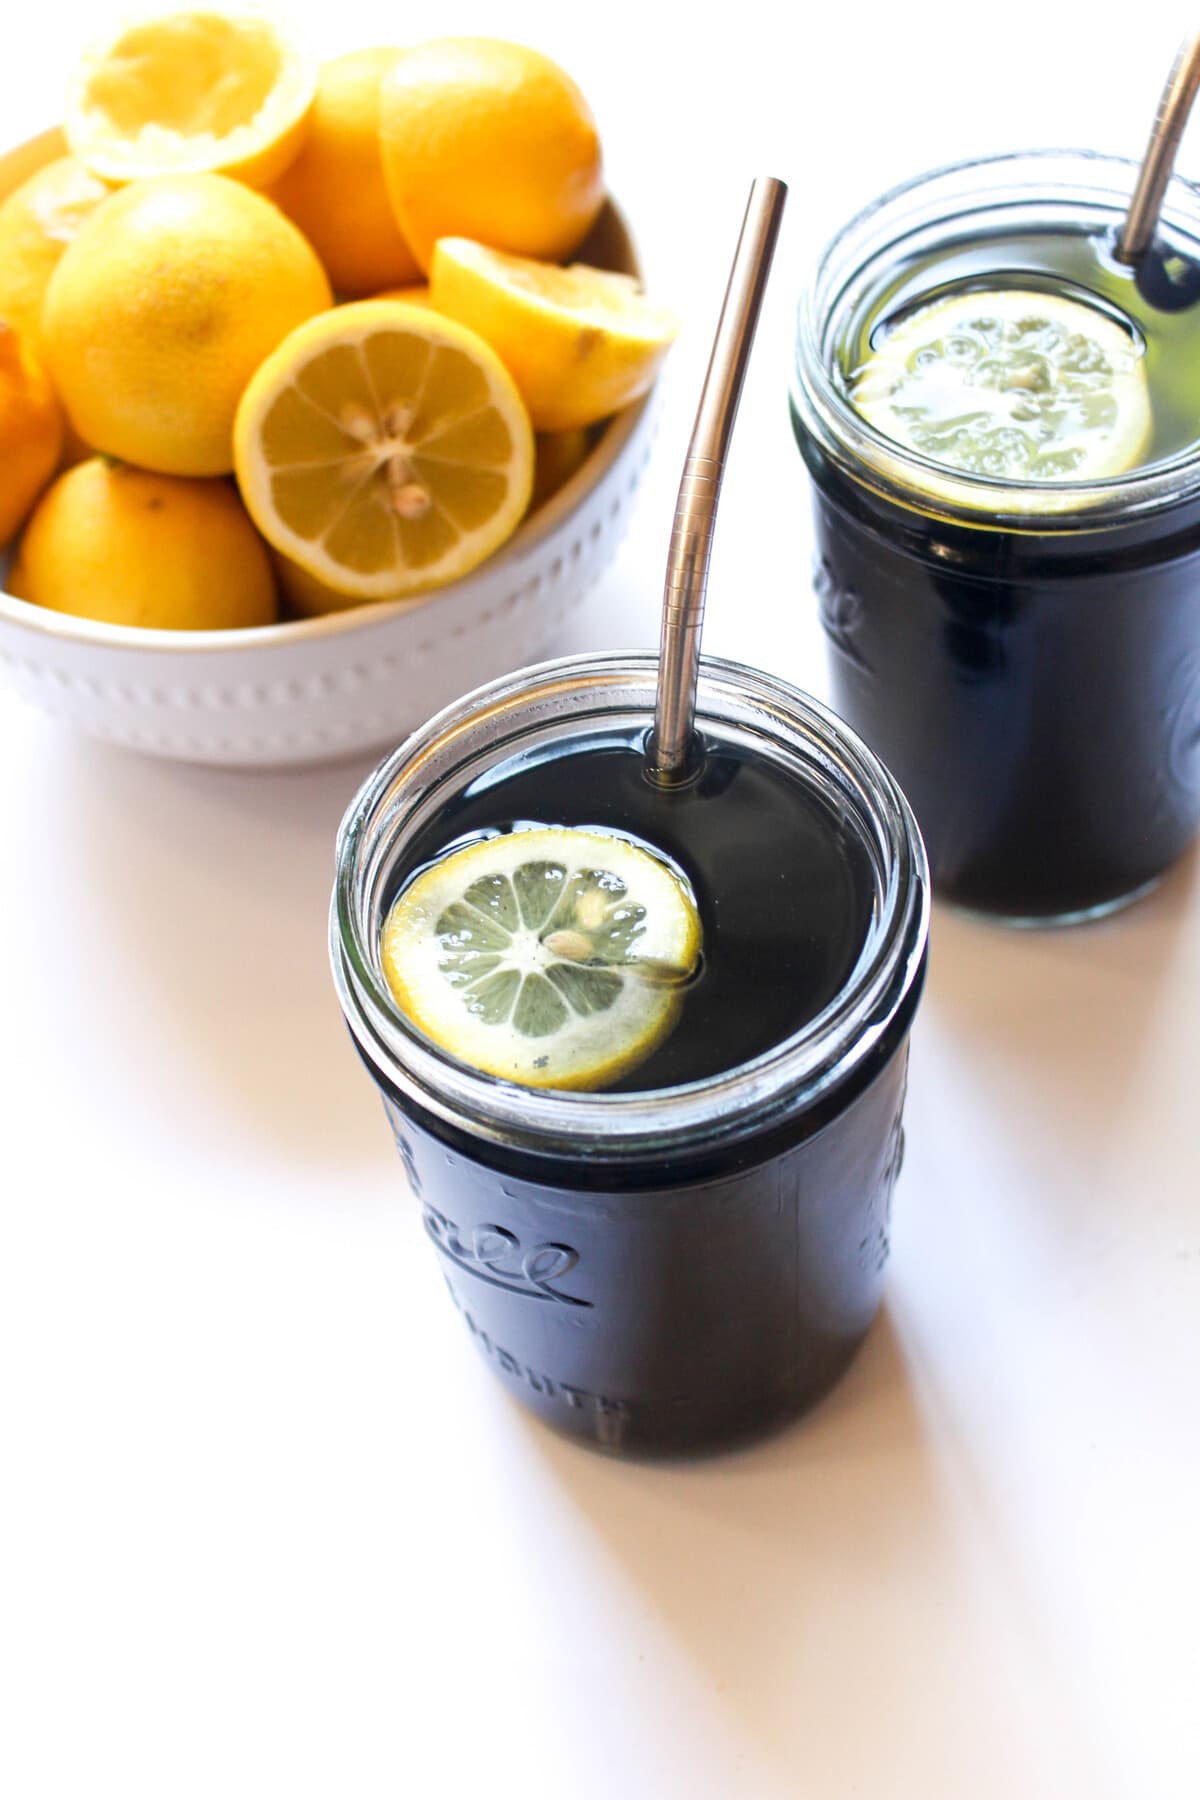 Don't be fooled by the color, this detox drink tastes just like lemonade!